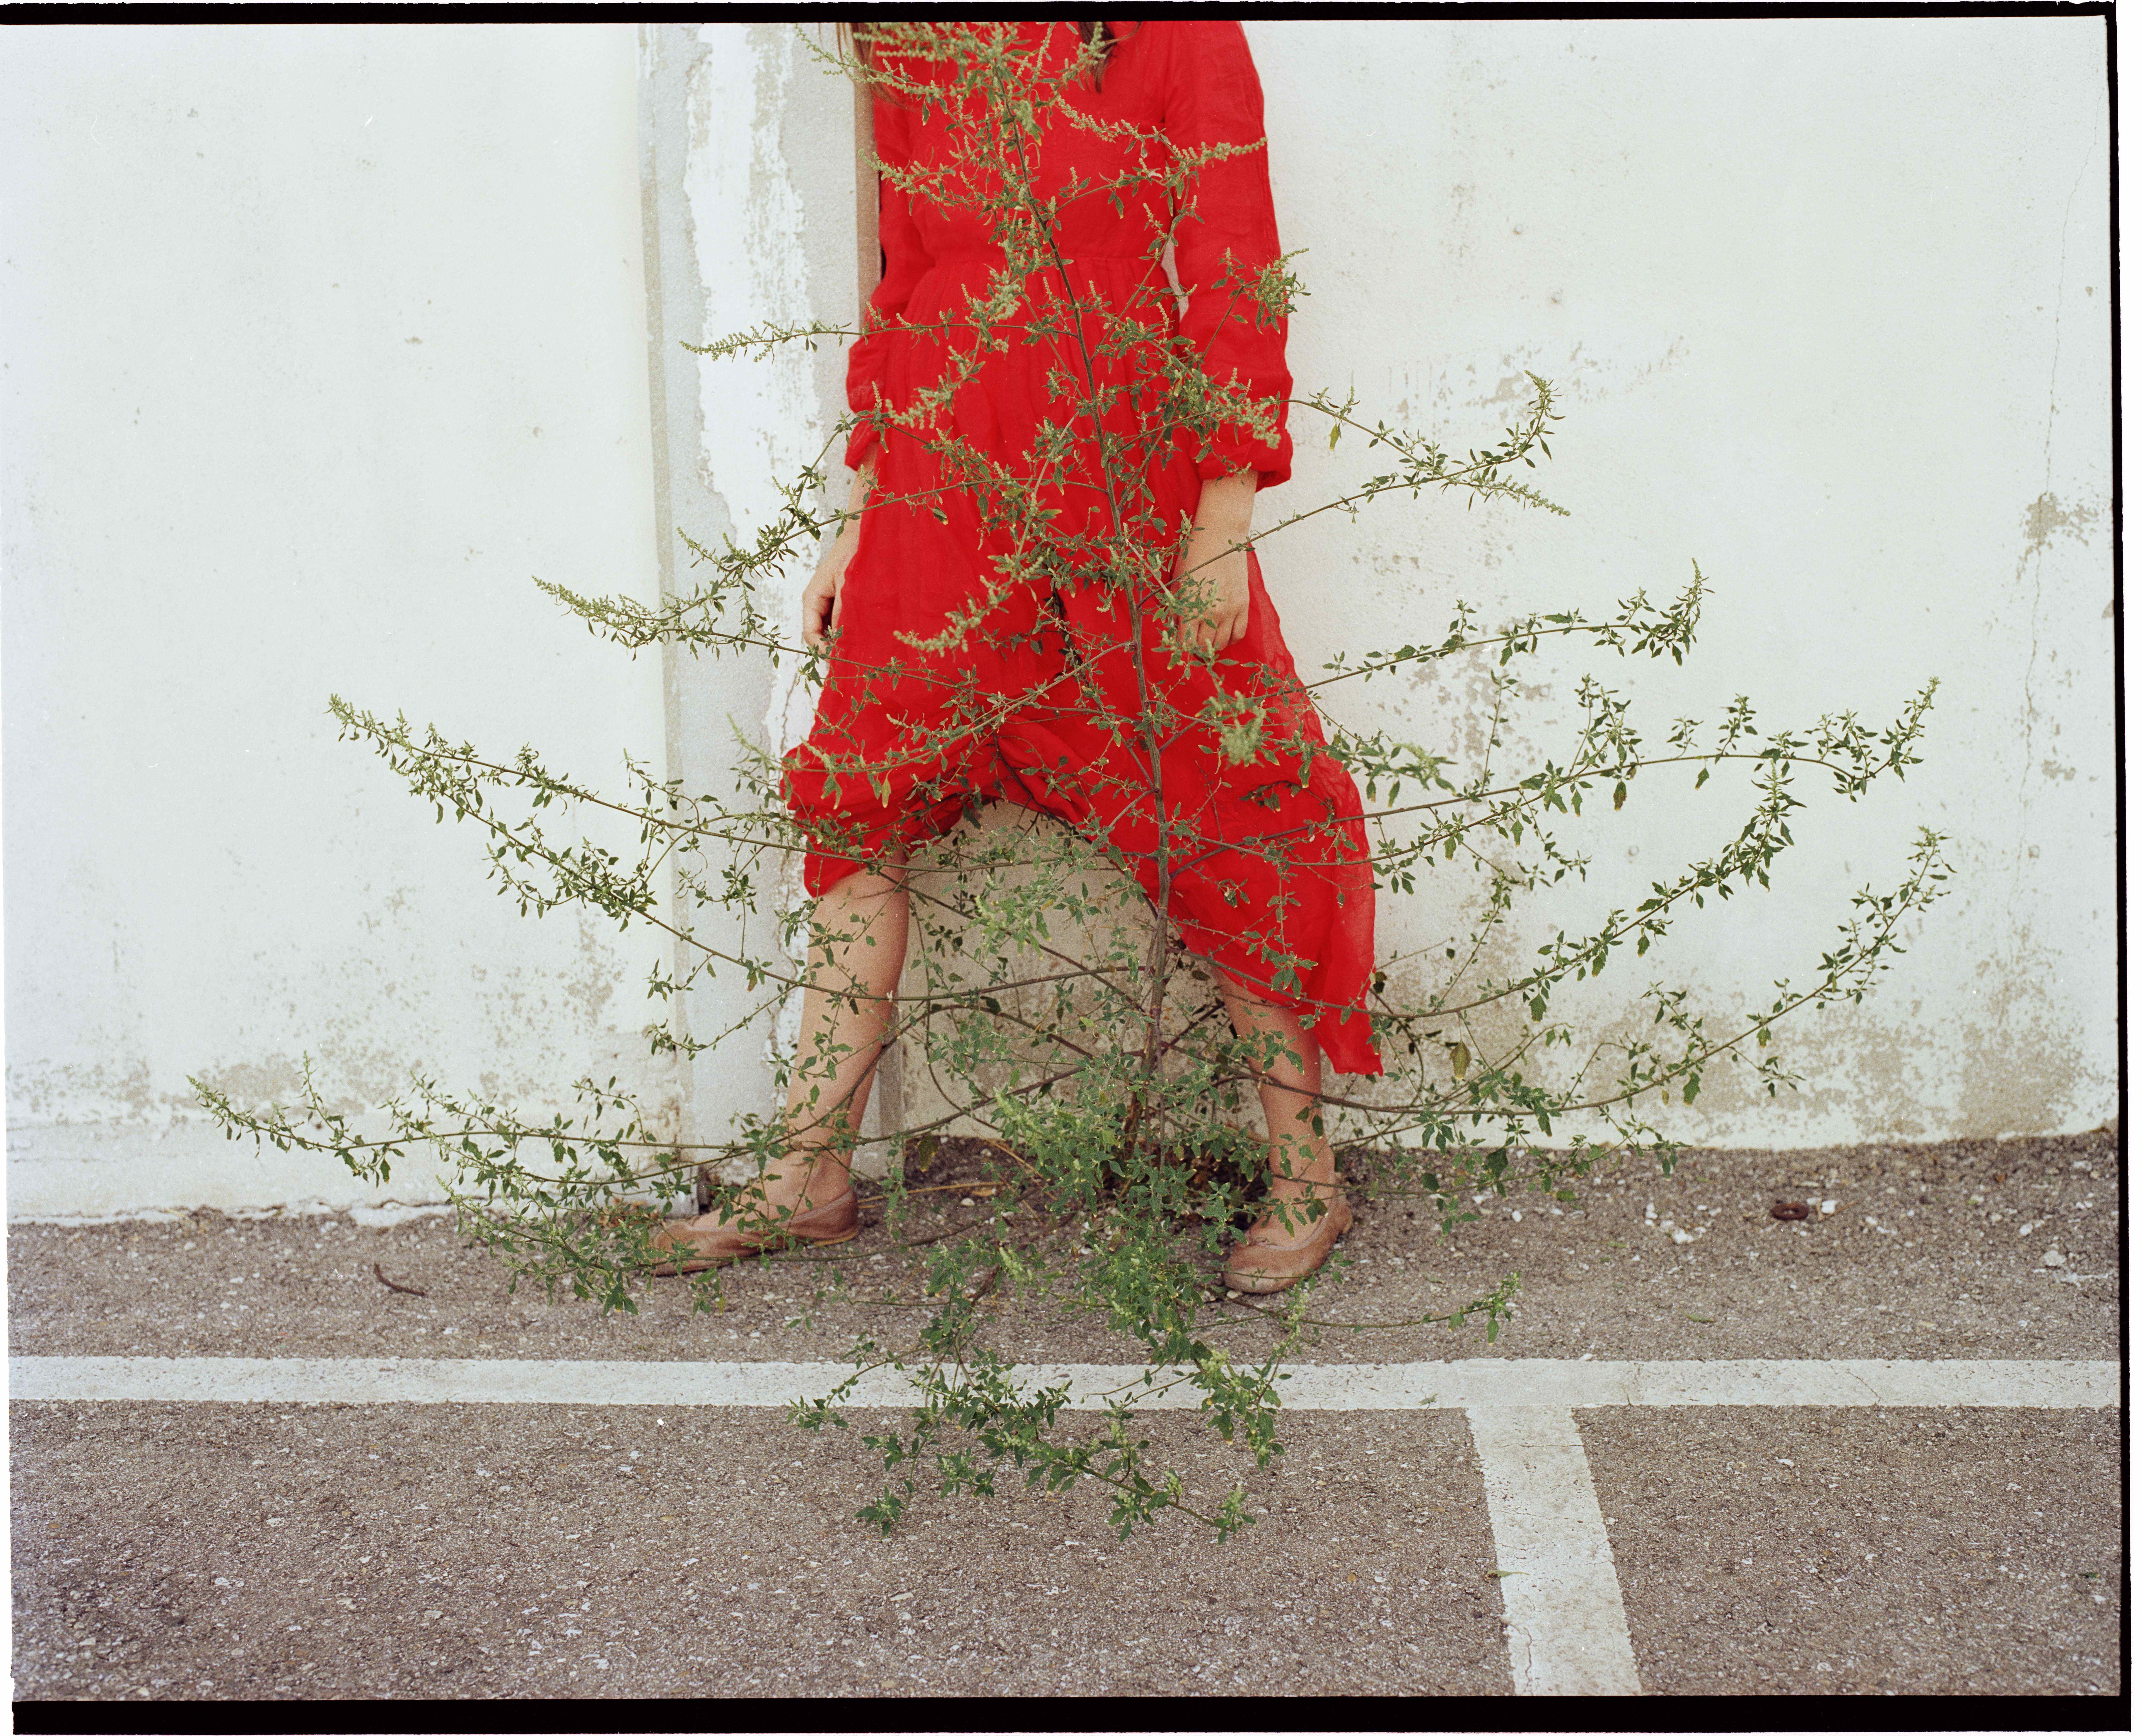 Wild Grass #4 (Mauvaises herbes) - Kate Barry, 2013